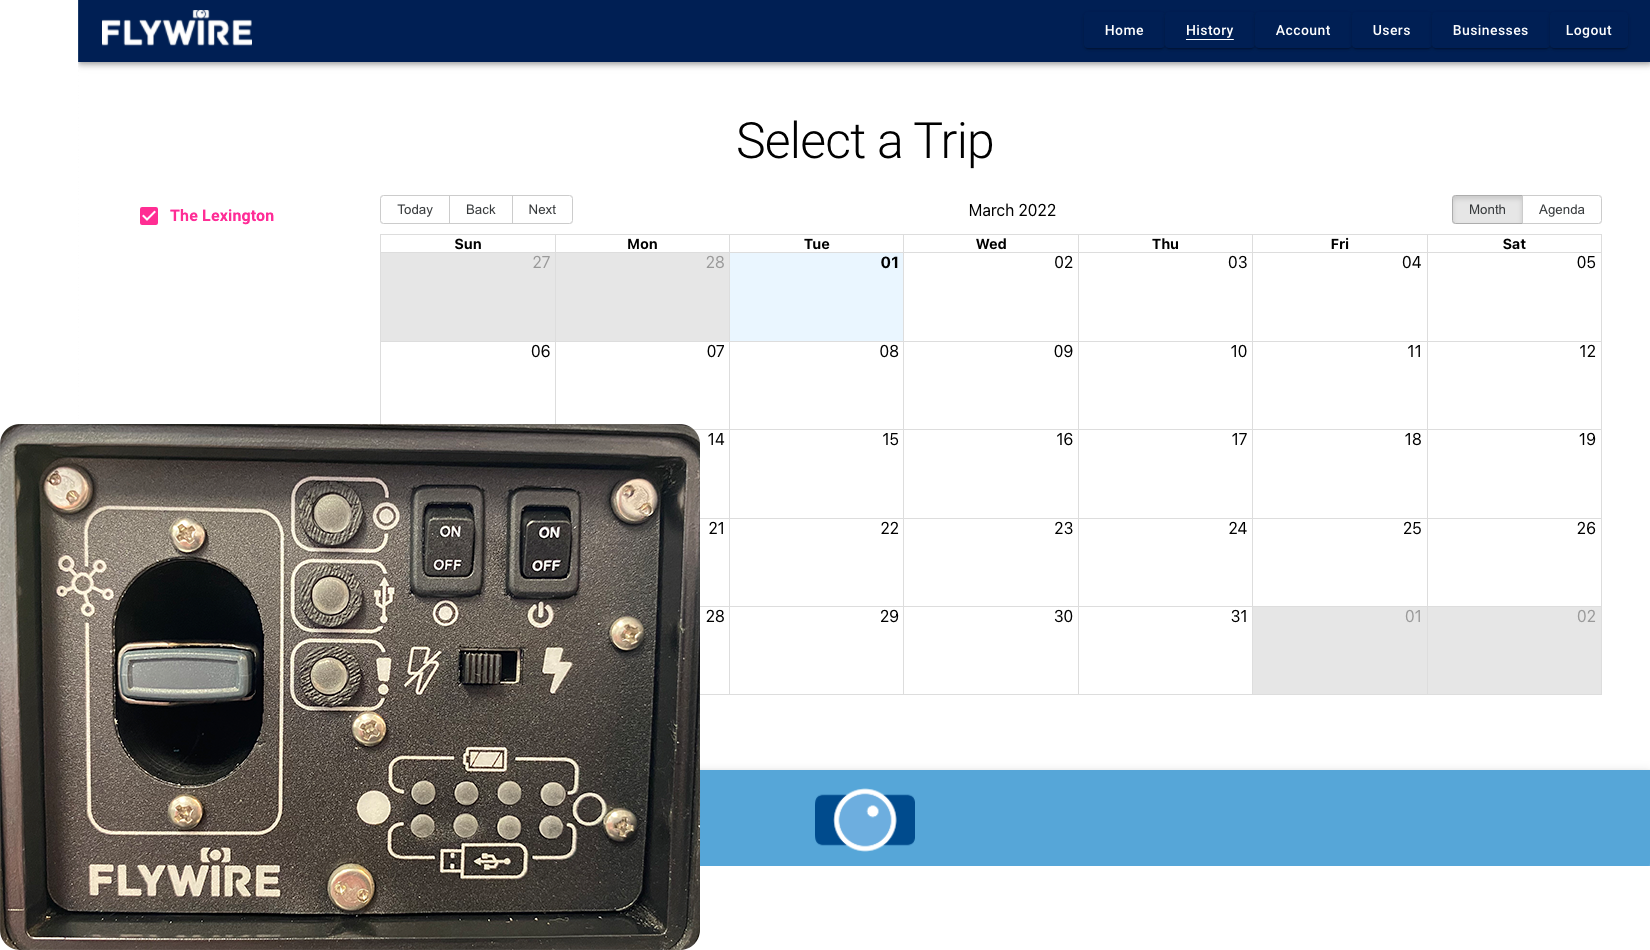 Calendar and hardware view